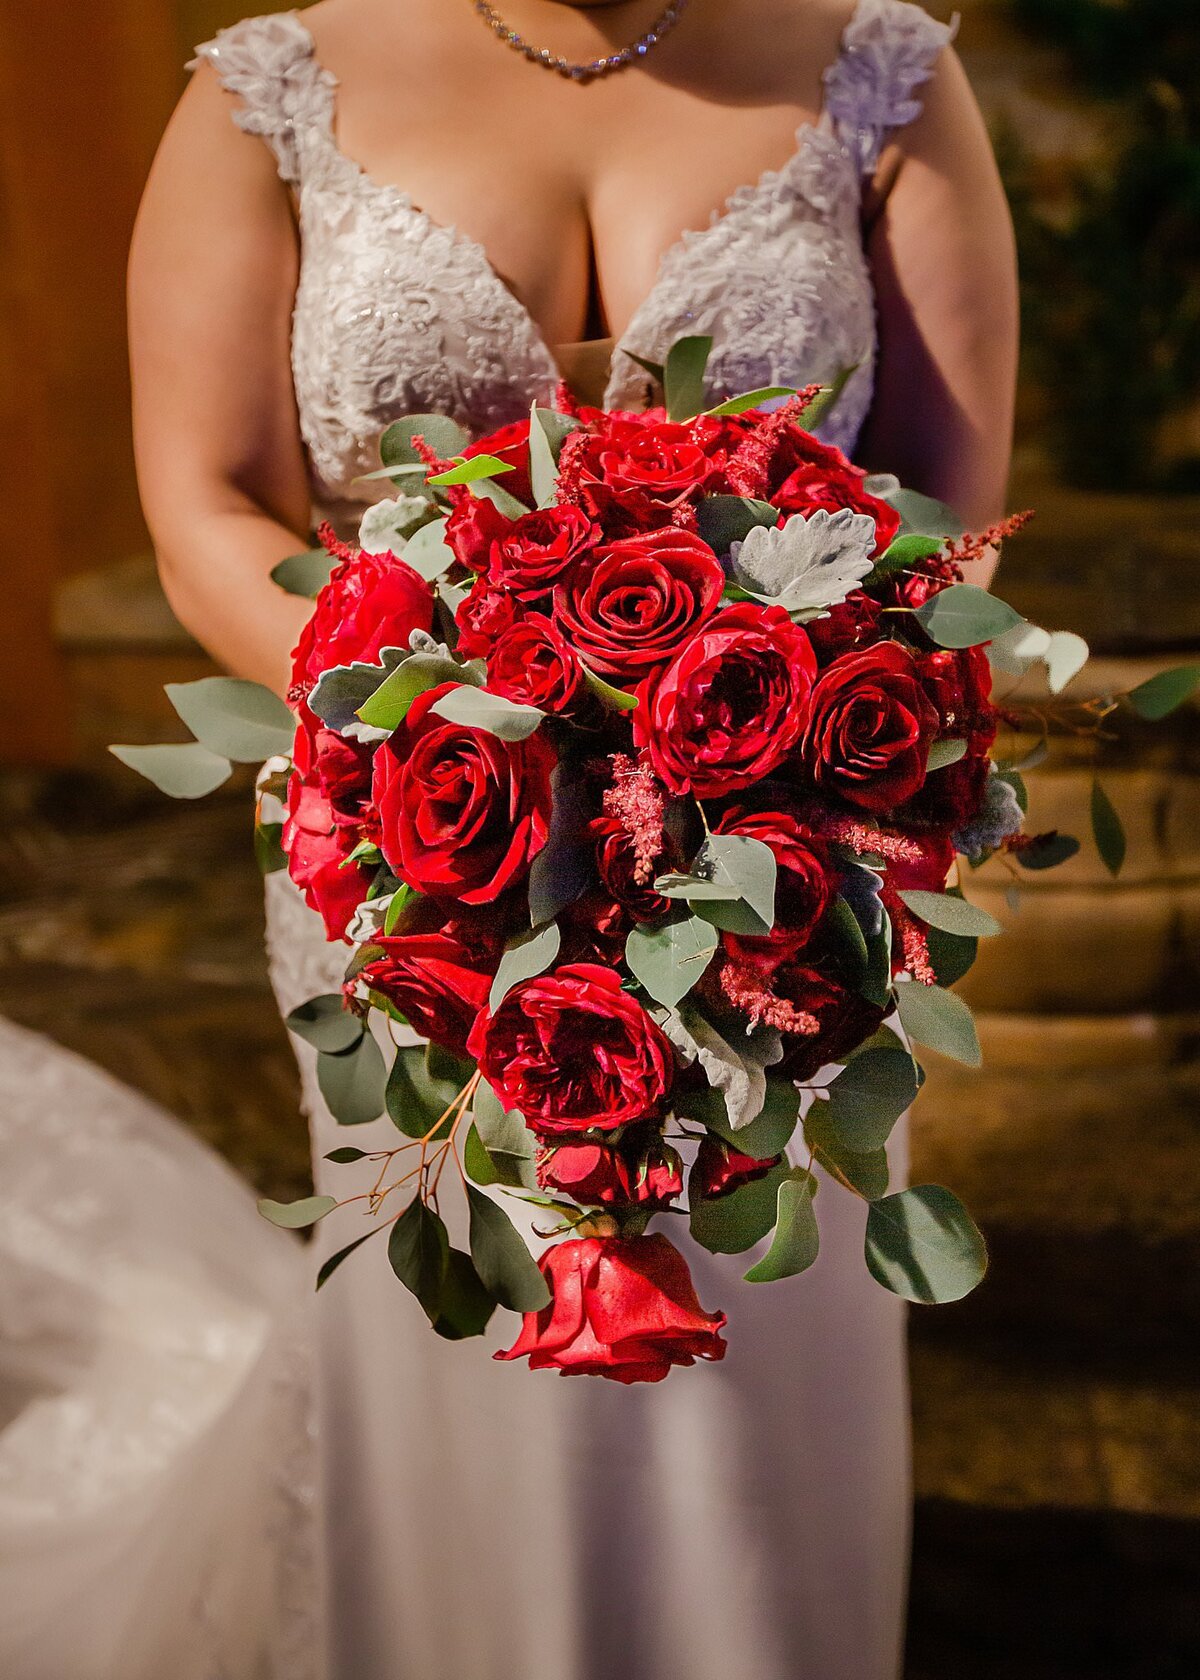 Disney's bride bouquet of red roses